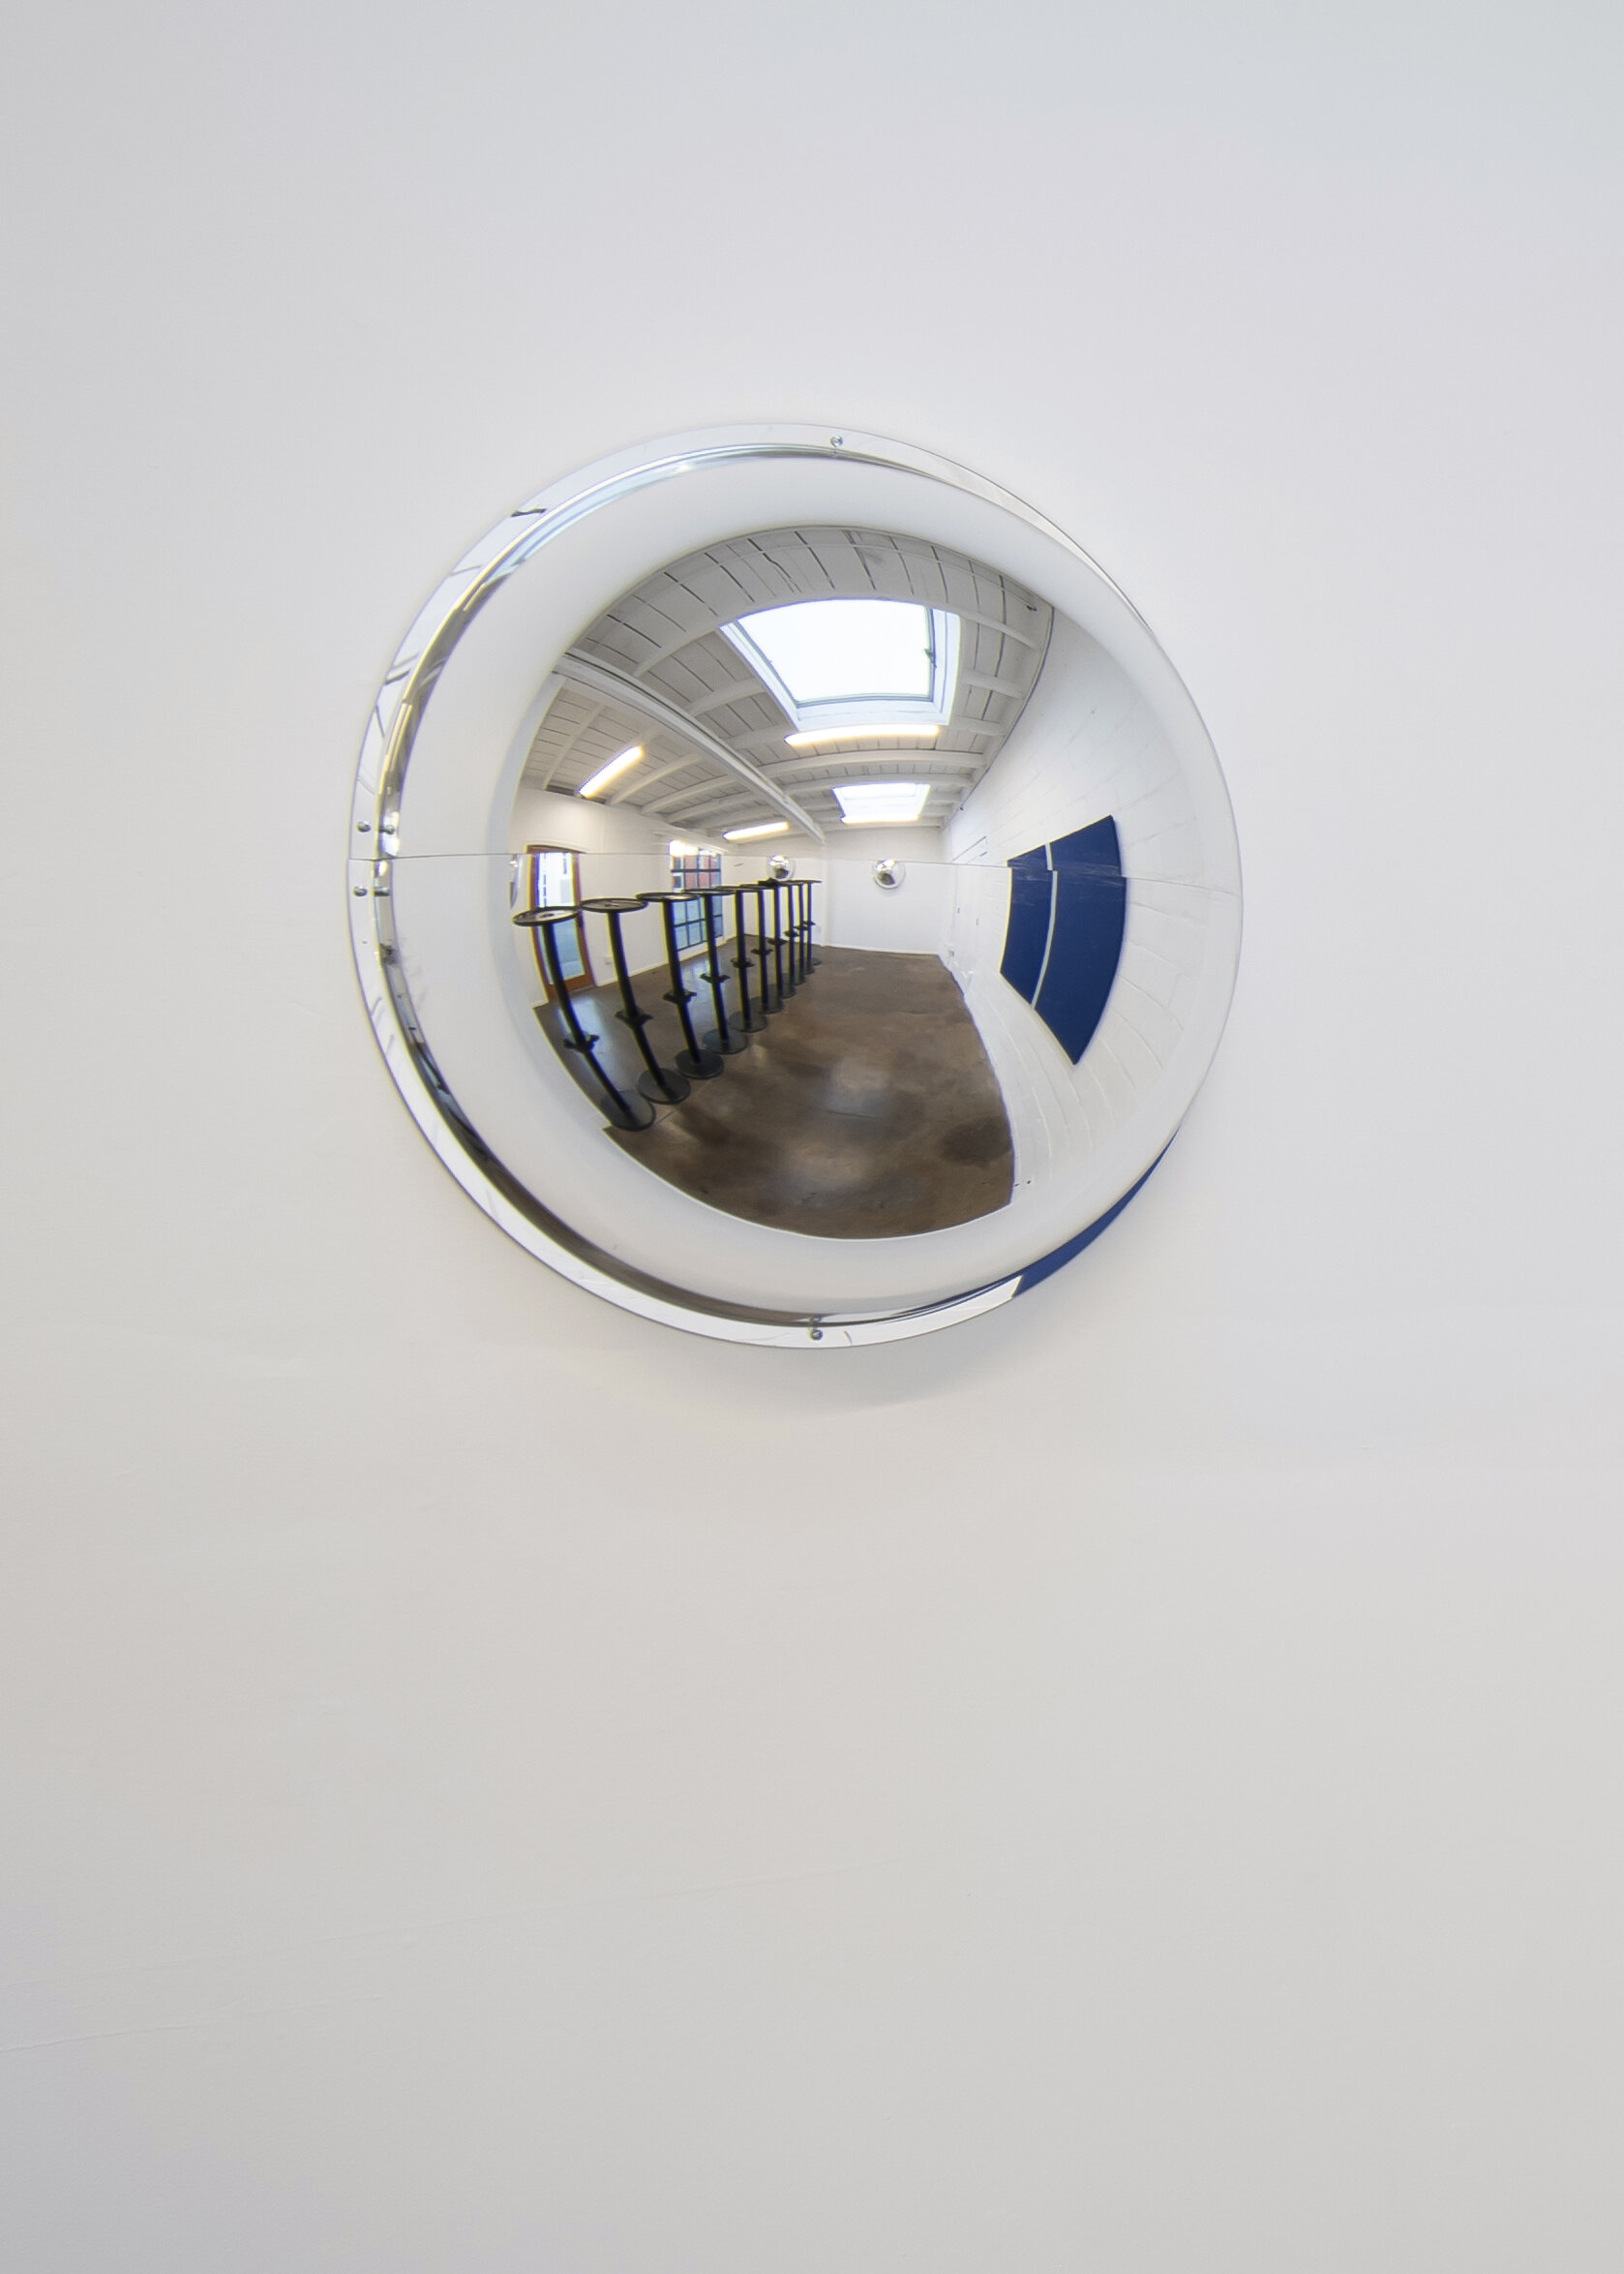  Débora Delmar,  Guarded View I , 2020. 26-inch diameter. SeeAll Half Dome Acrylic Security Mirrors. 